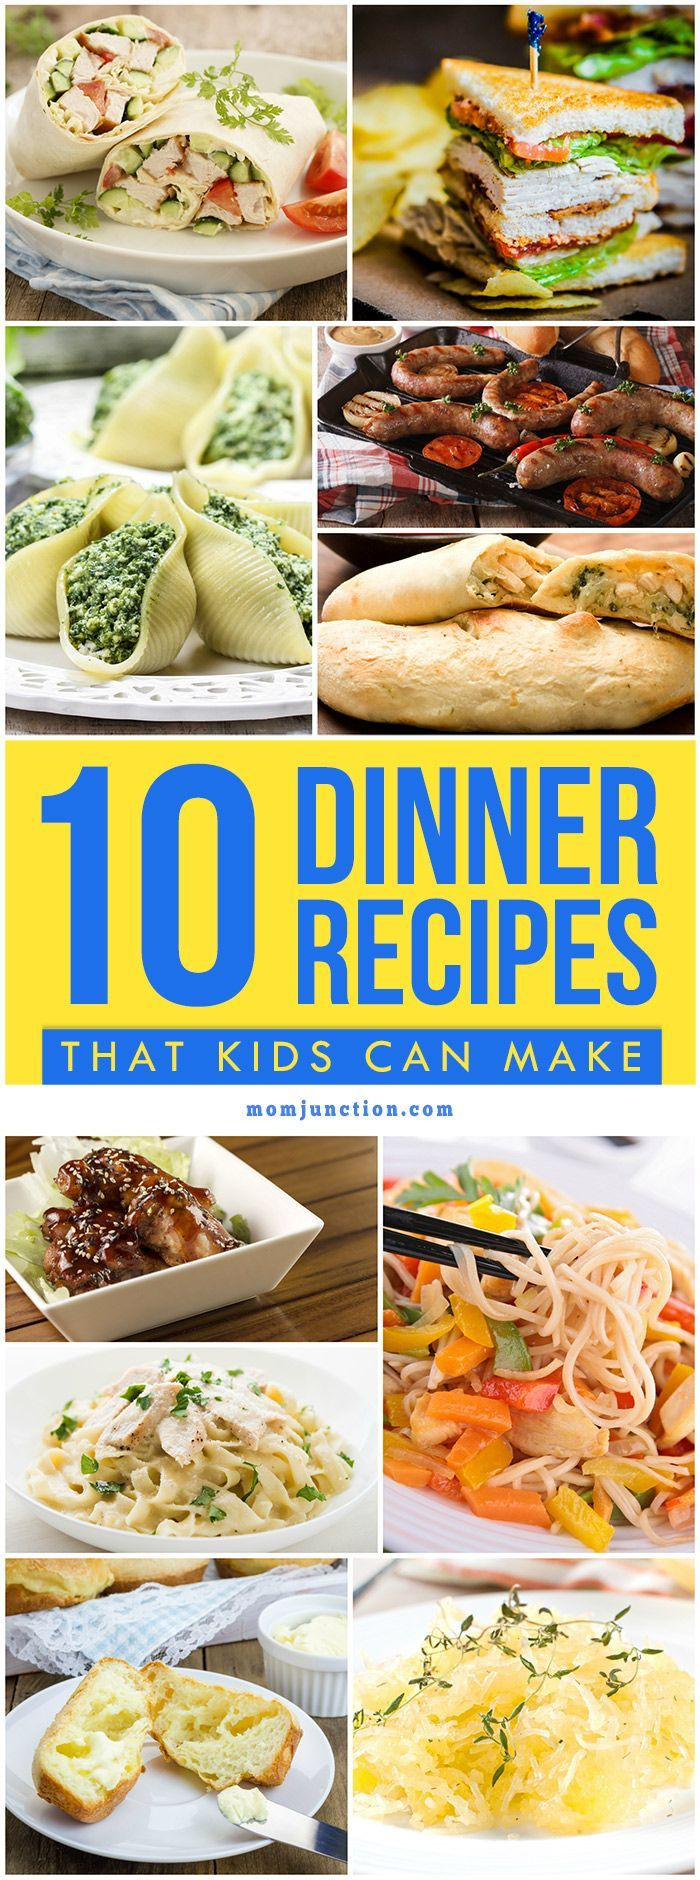 Easy Dinner Recipes Kids Can Make
 15 Quick And Yummy Dinner Recipes For Kids